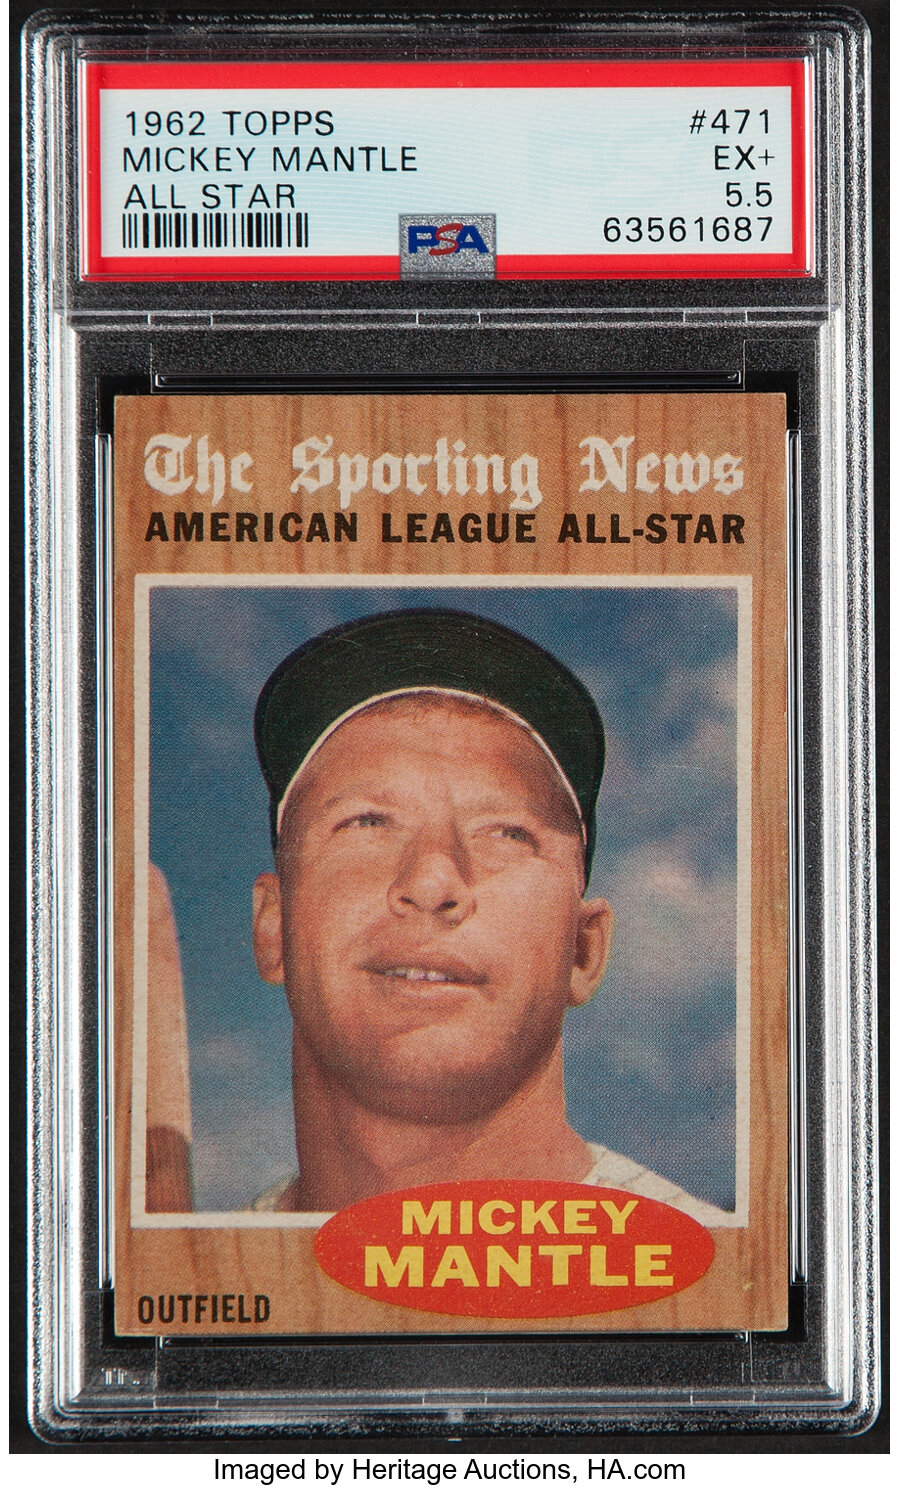 1962 Topps Mickey Mantle (All Star) #471 PSA EX+ 5.5